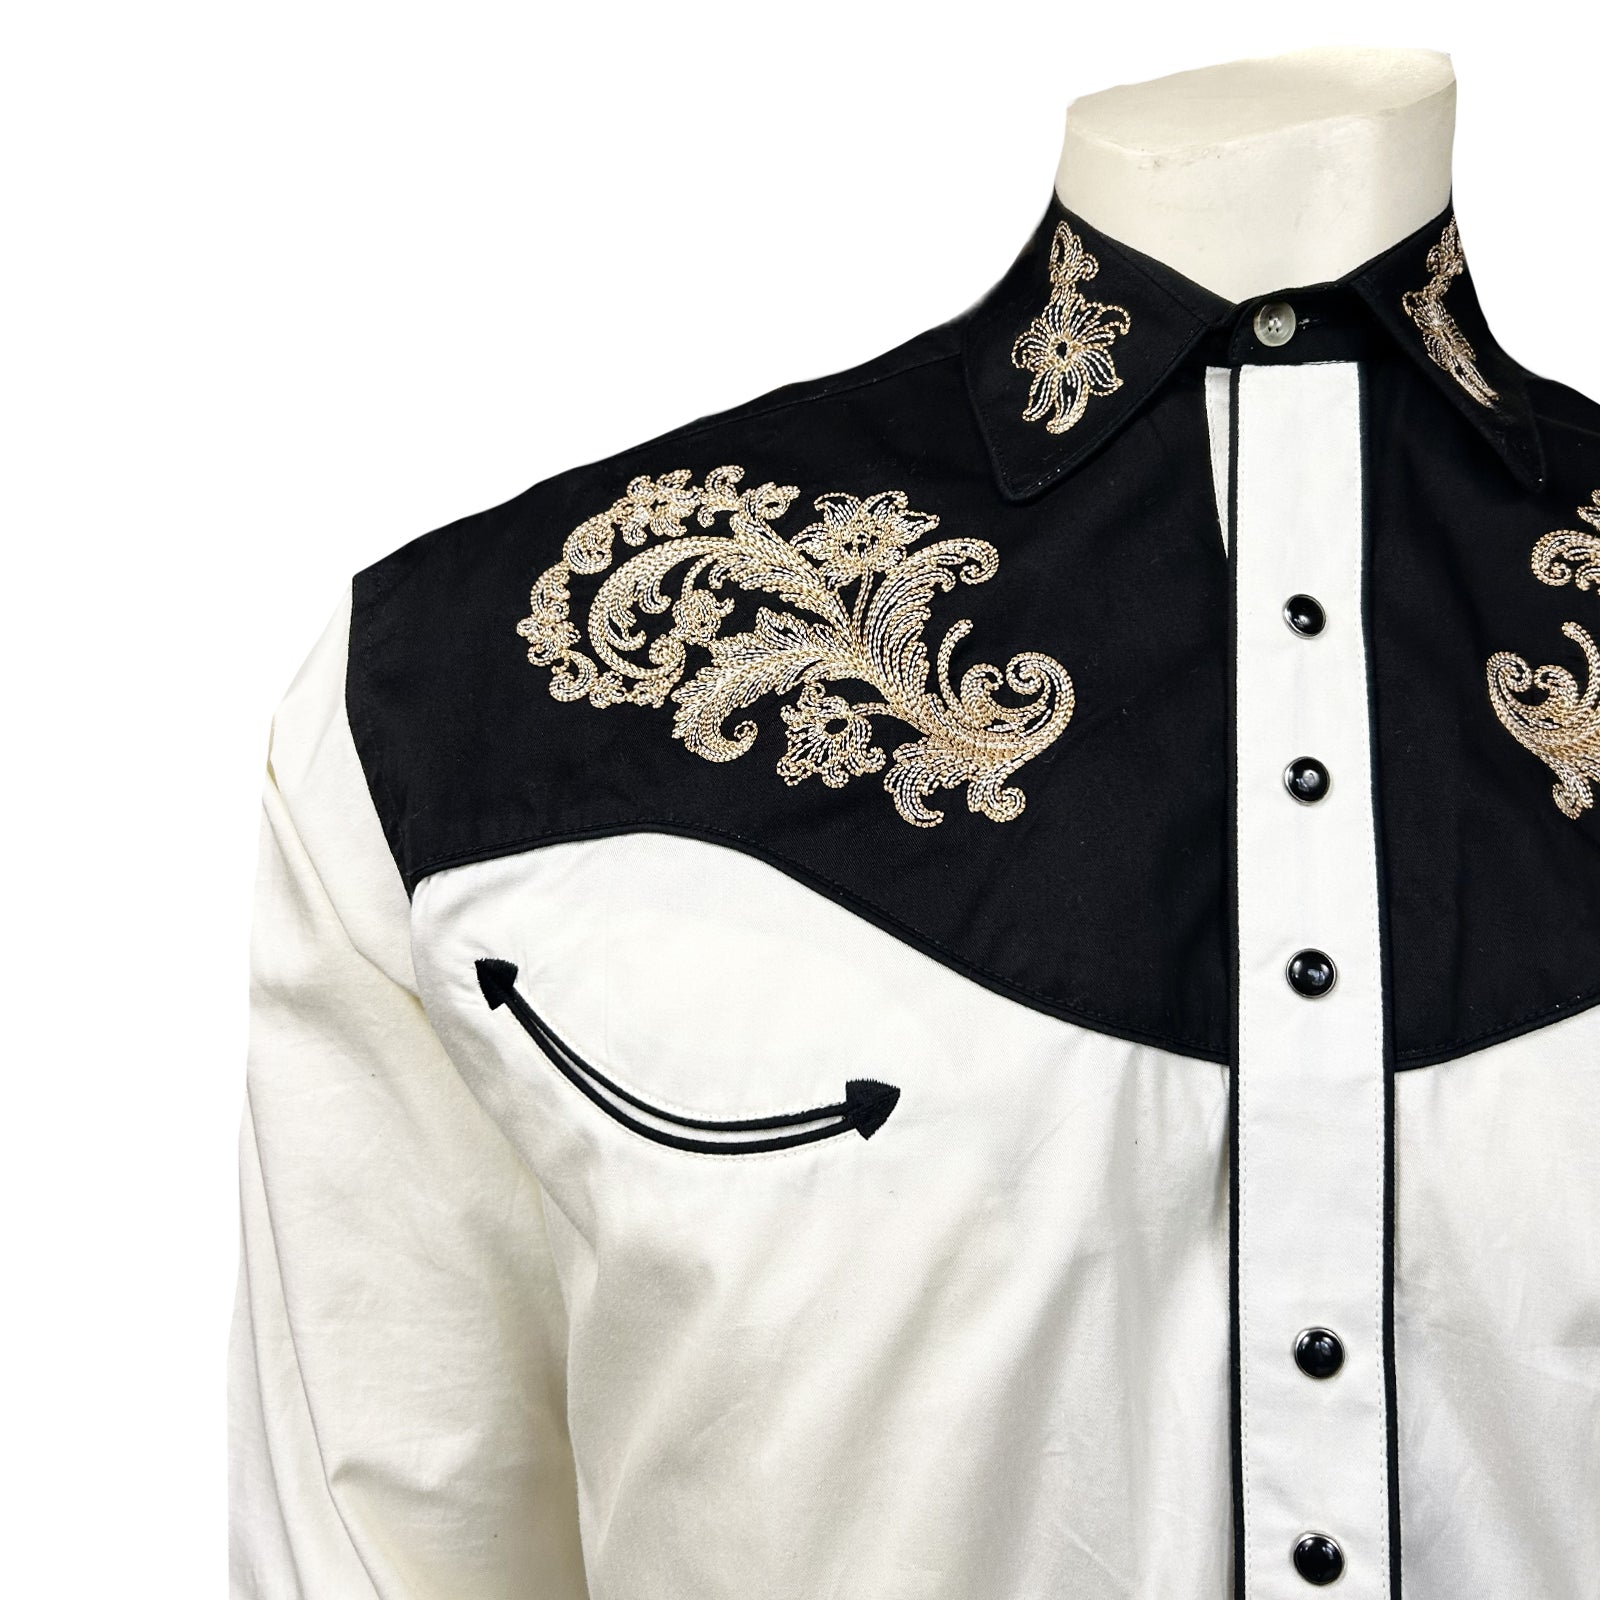 Men’s Vintage 2-Tone Khaki & Black Western Shirt with Floral Embroidery